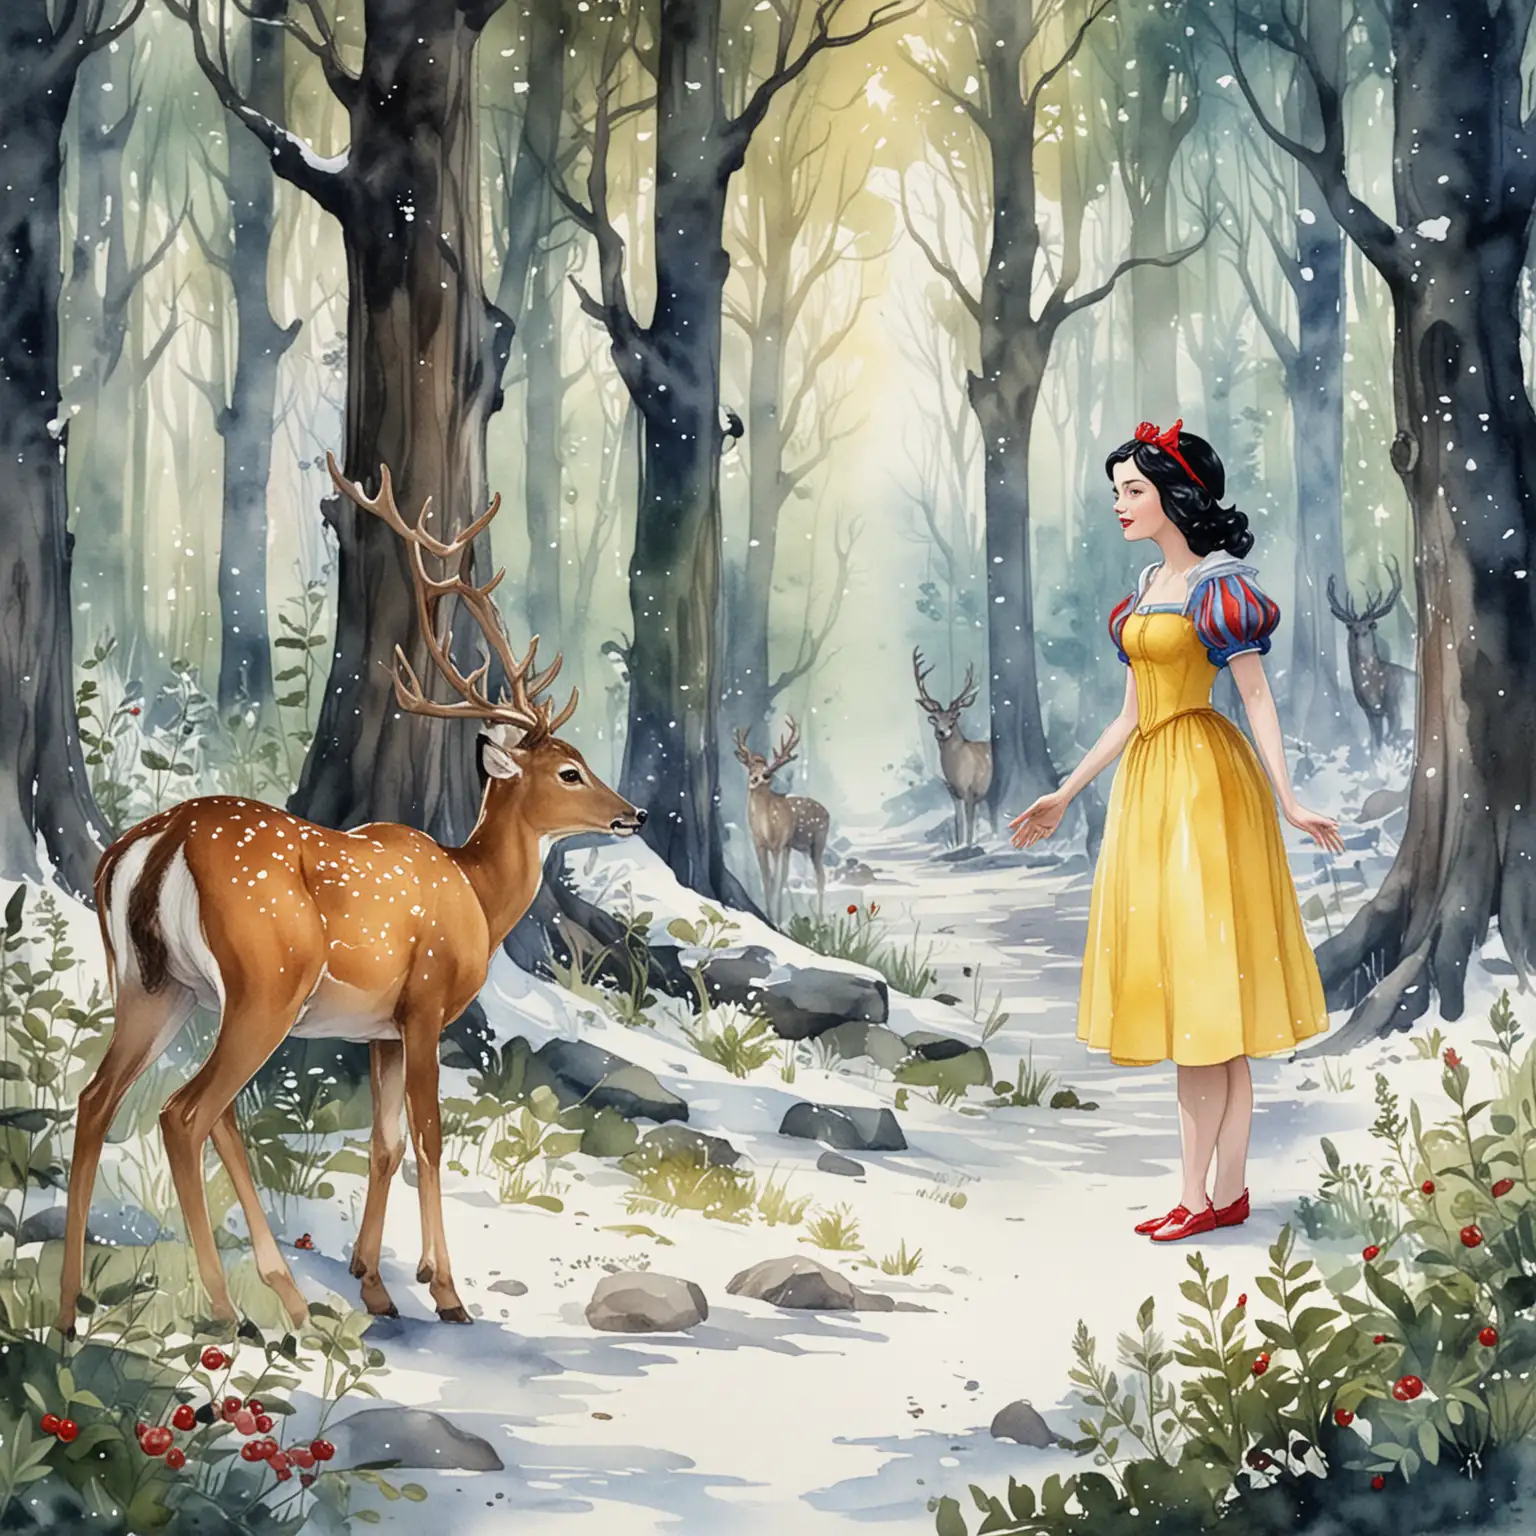 Snow White Greeting Deer in Enchanting Fairytale Forest Watercolor Illustration